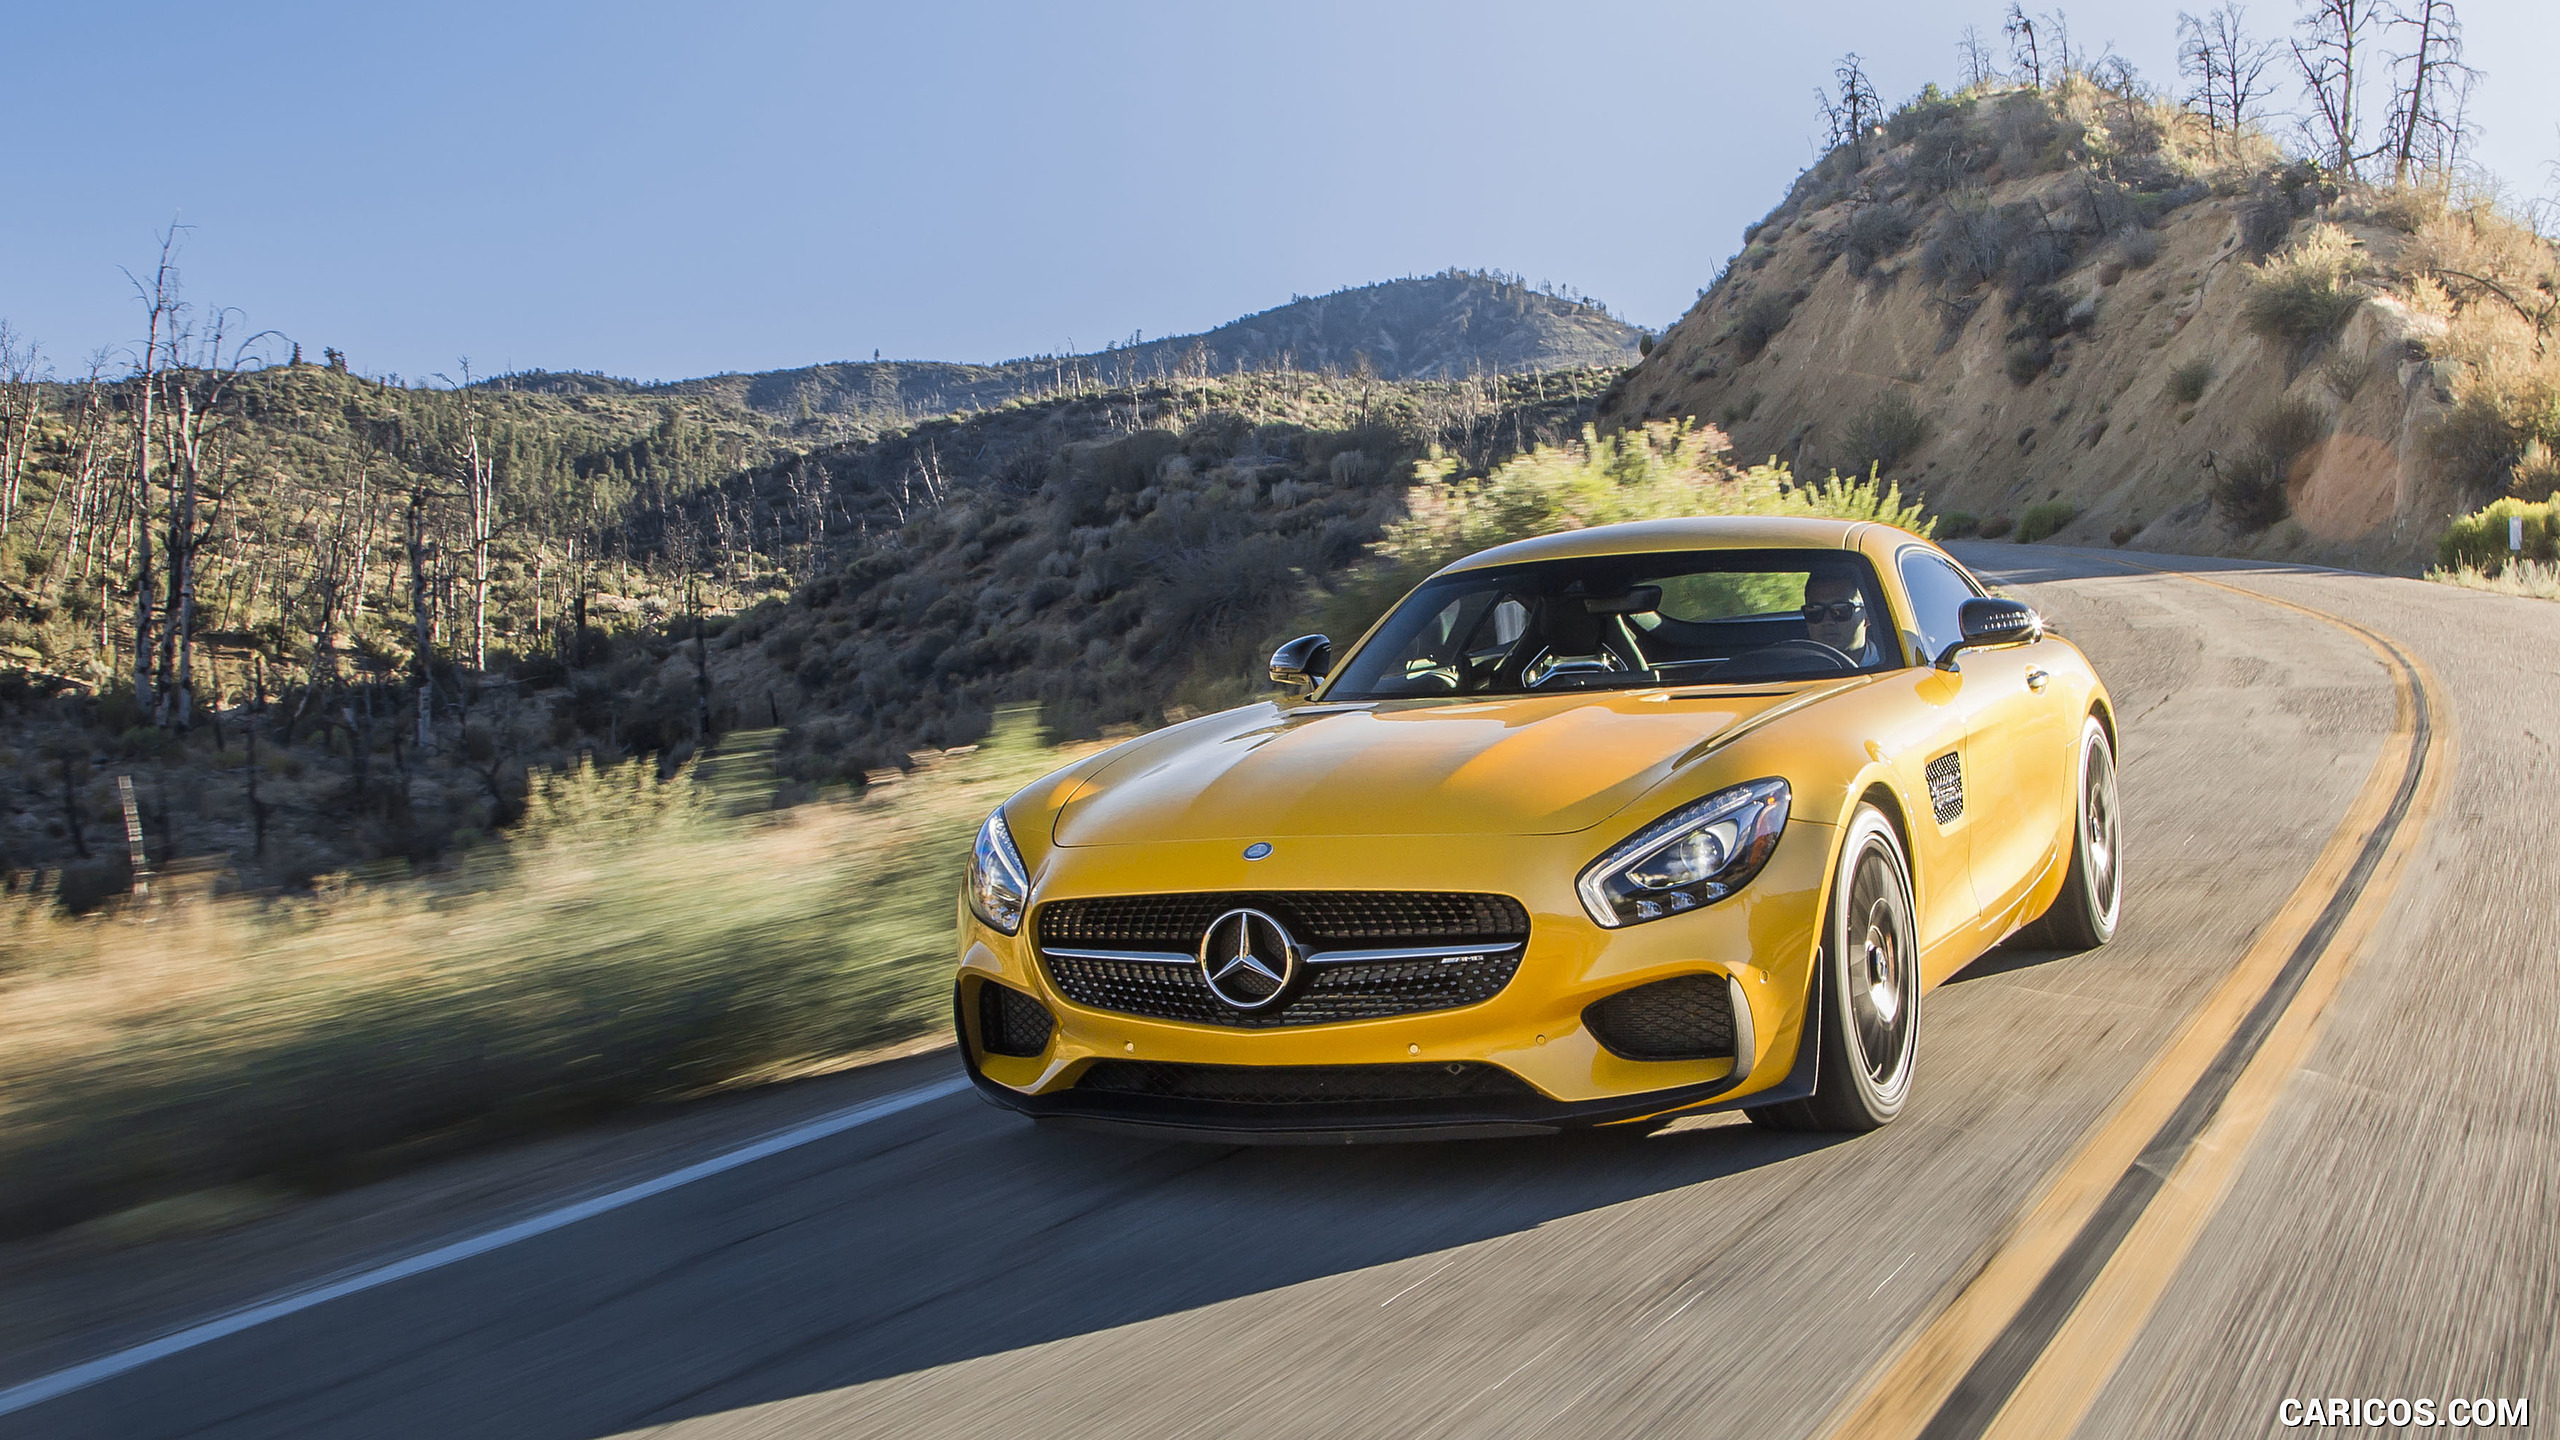 2017 Mercedes-AMG GT S (US-Spec) - Front, #16 of 55